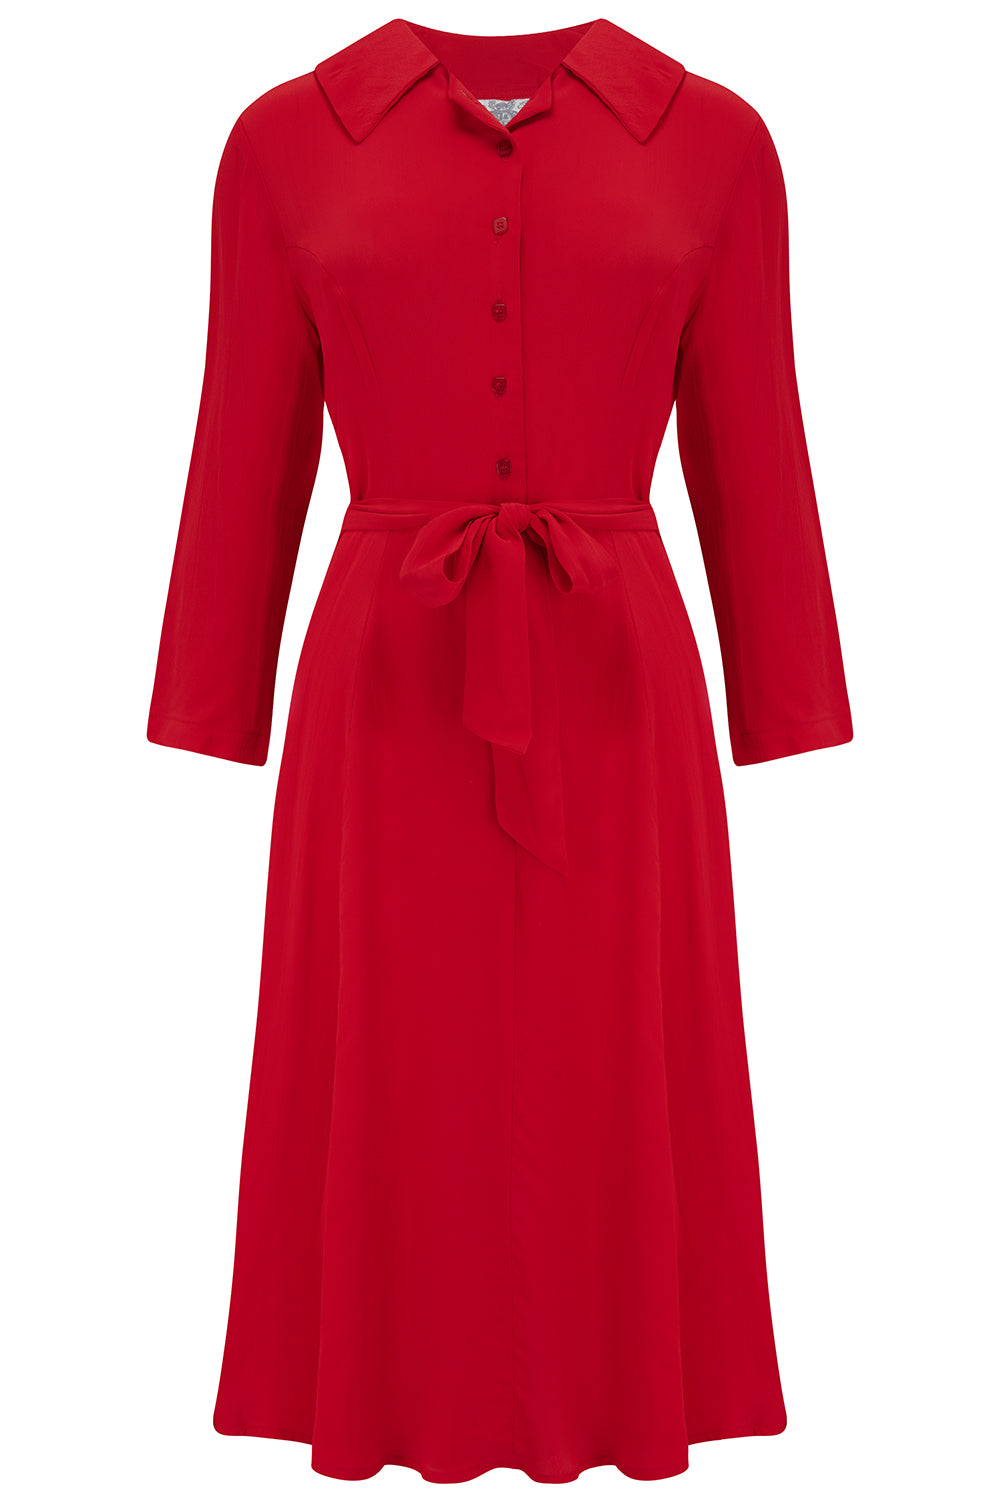 Violet dress in Red , A Classic 1940s Inspired Day dress, True Vintage Style - True and authentic vintage style clothing, inspired by the Classic styles of CC41 , WW2 and the fun 1950s RocknRoll era, for everyday wear plus events like Goodwood Revival, Twinwood Festival and Viva Las Vegas Rockabilly Weekend Rock n Romance The Seamstress of Bloomsbury